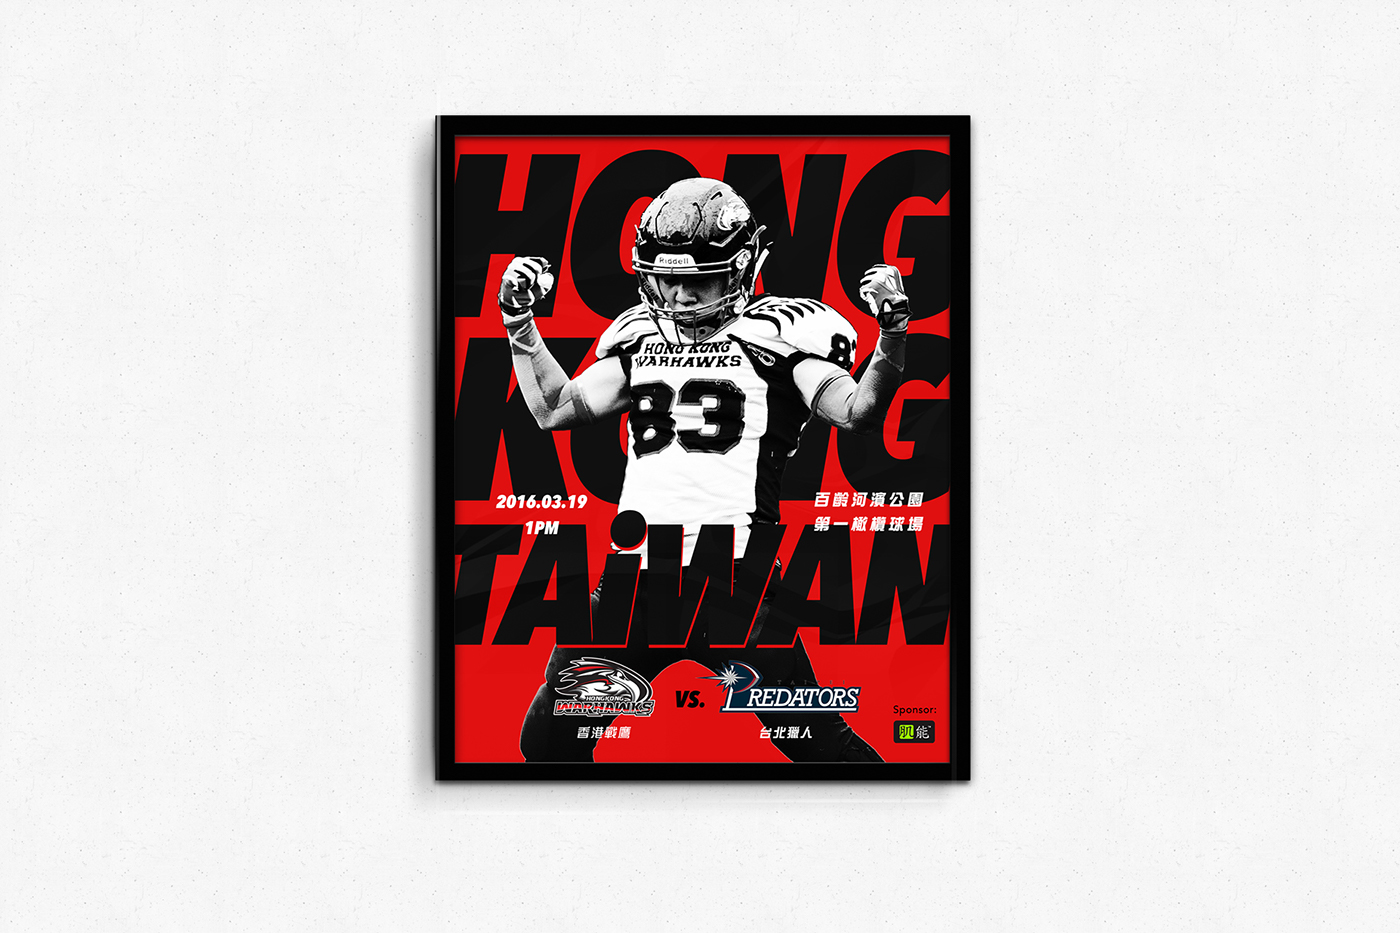 hk Hong Kong graphic design poster football sports warhawks red Game Day Event photo